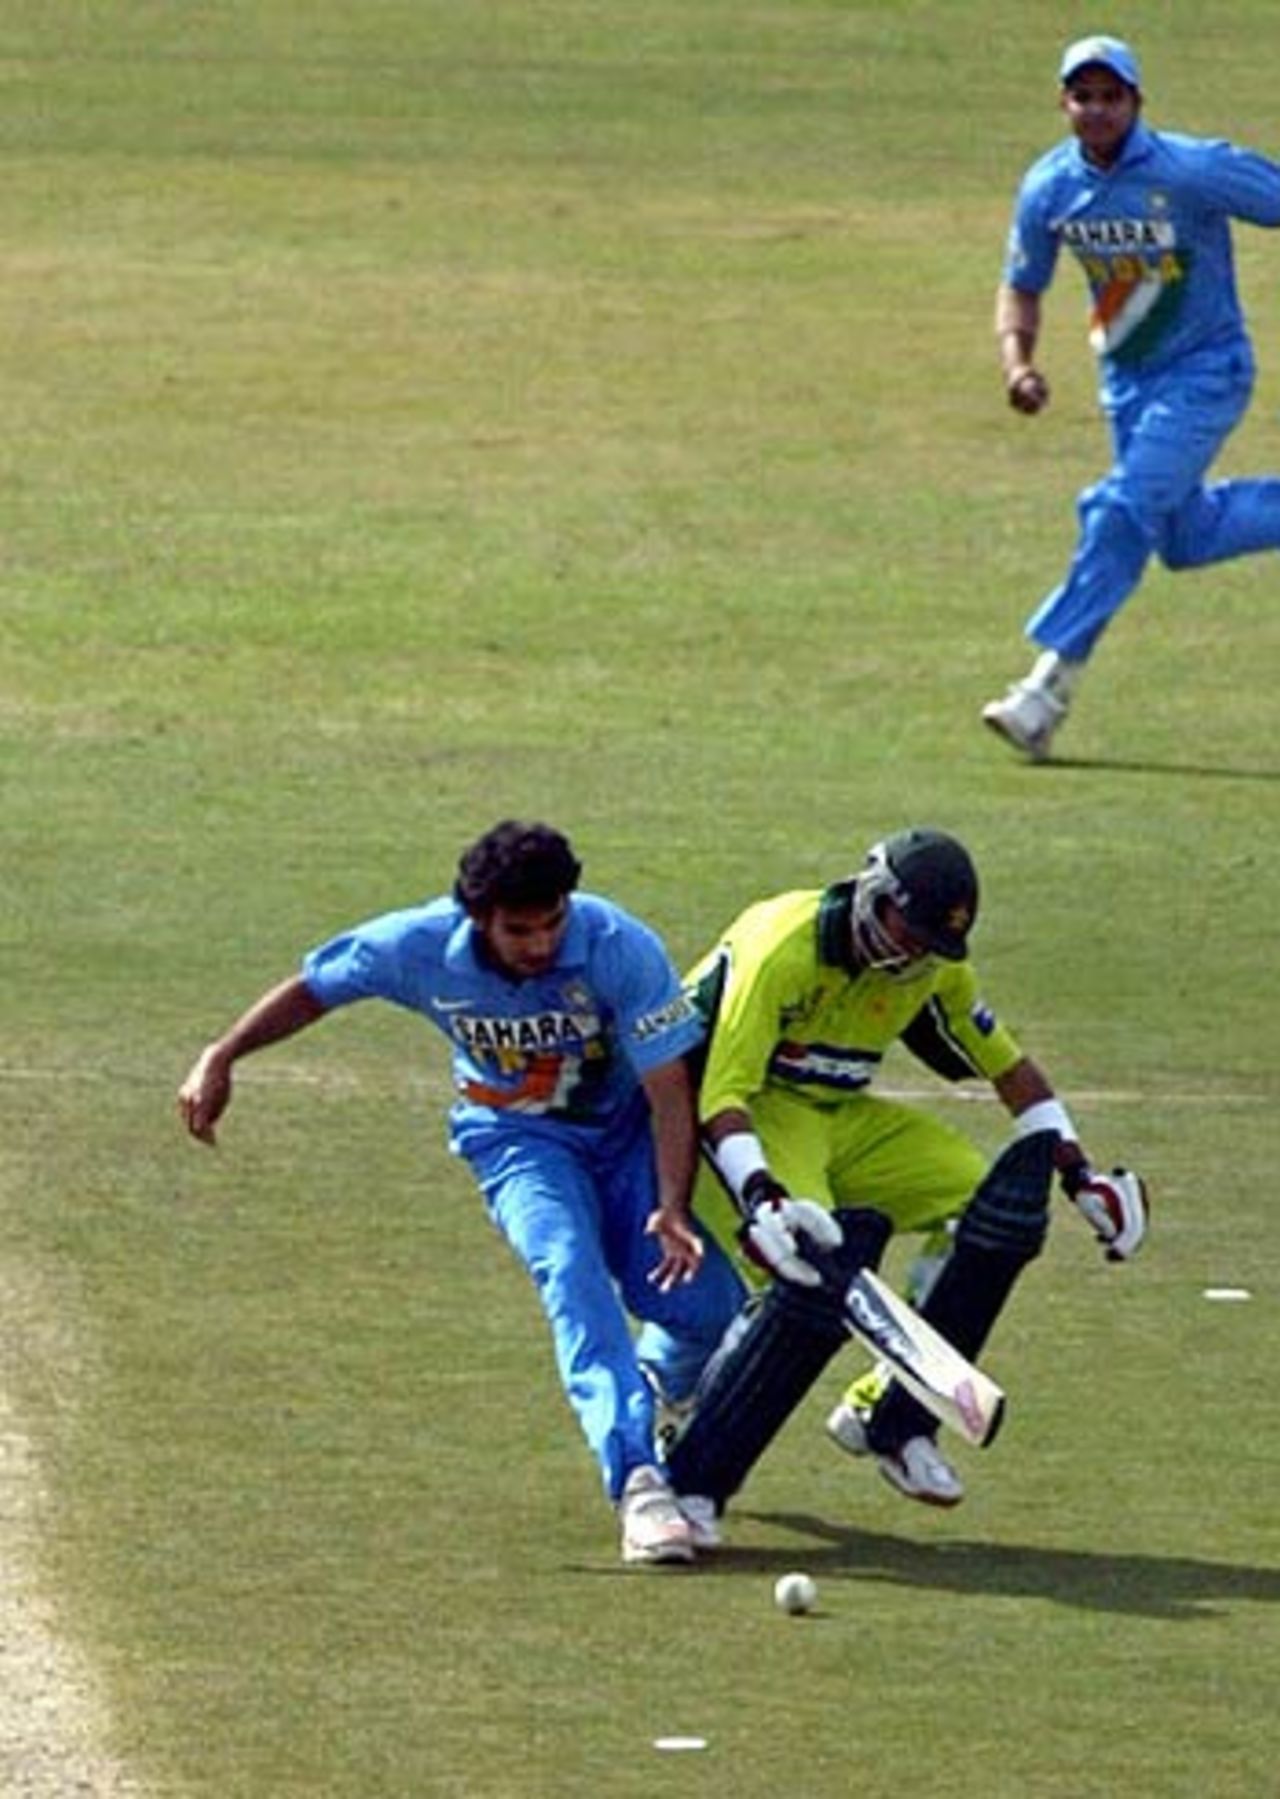 Zaheer Khan collides with Shoaib Malik in attempting a run out at the striker's end, Pakistan v India, 2nd ODI, Rawalpindi, February 11 2006